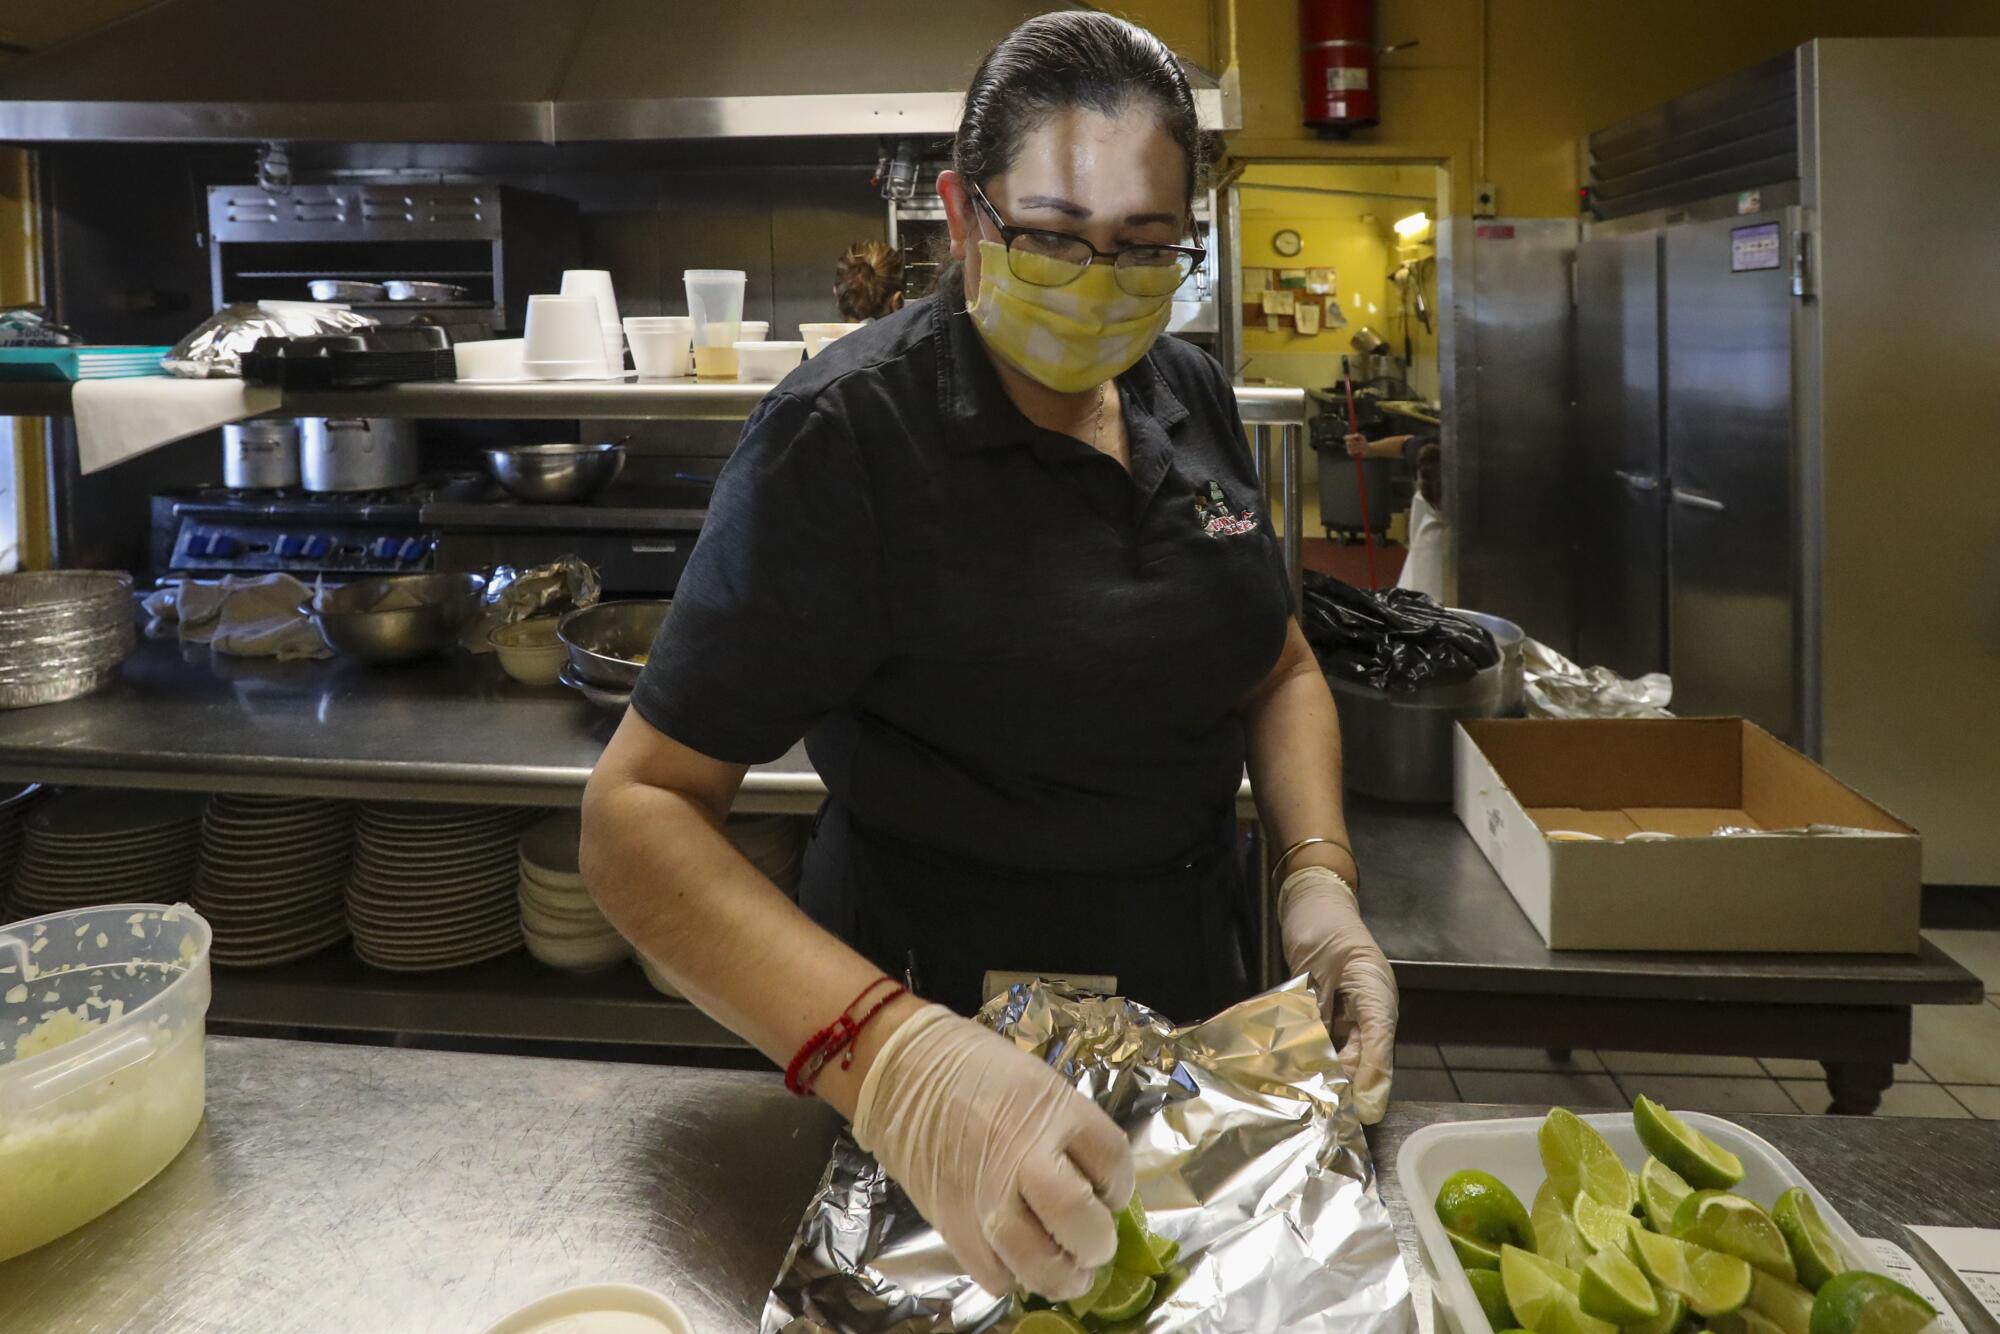 Patty Martinez, who has worked at Mitla Cafe for 33 years, called Lucy Reyes her best friend.